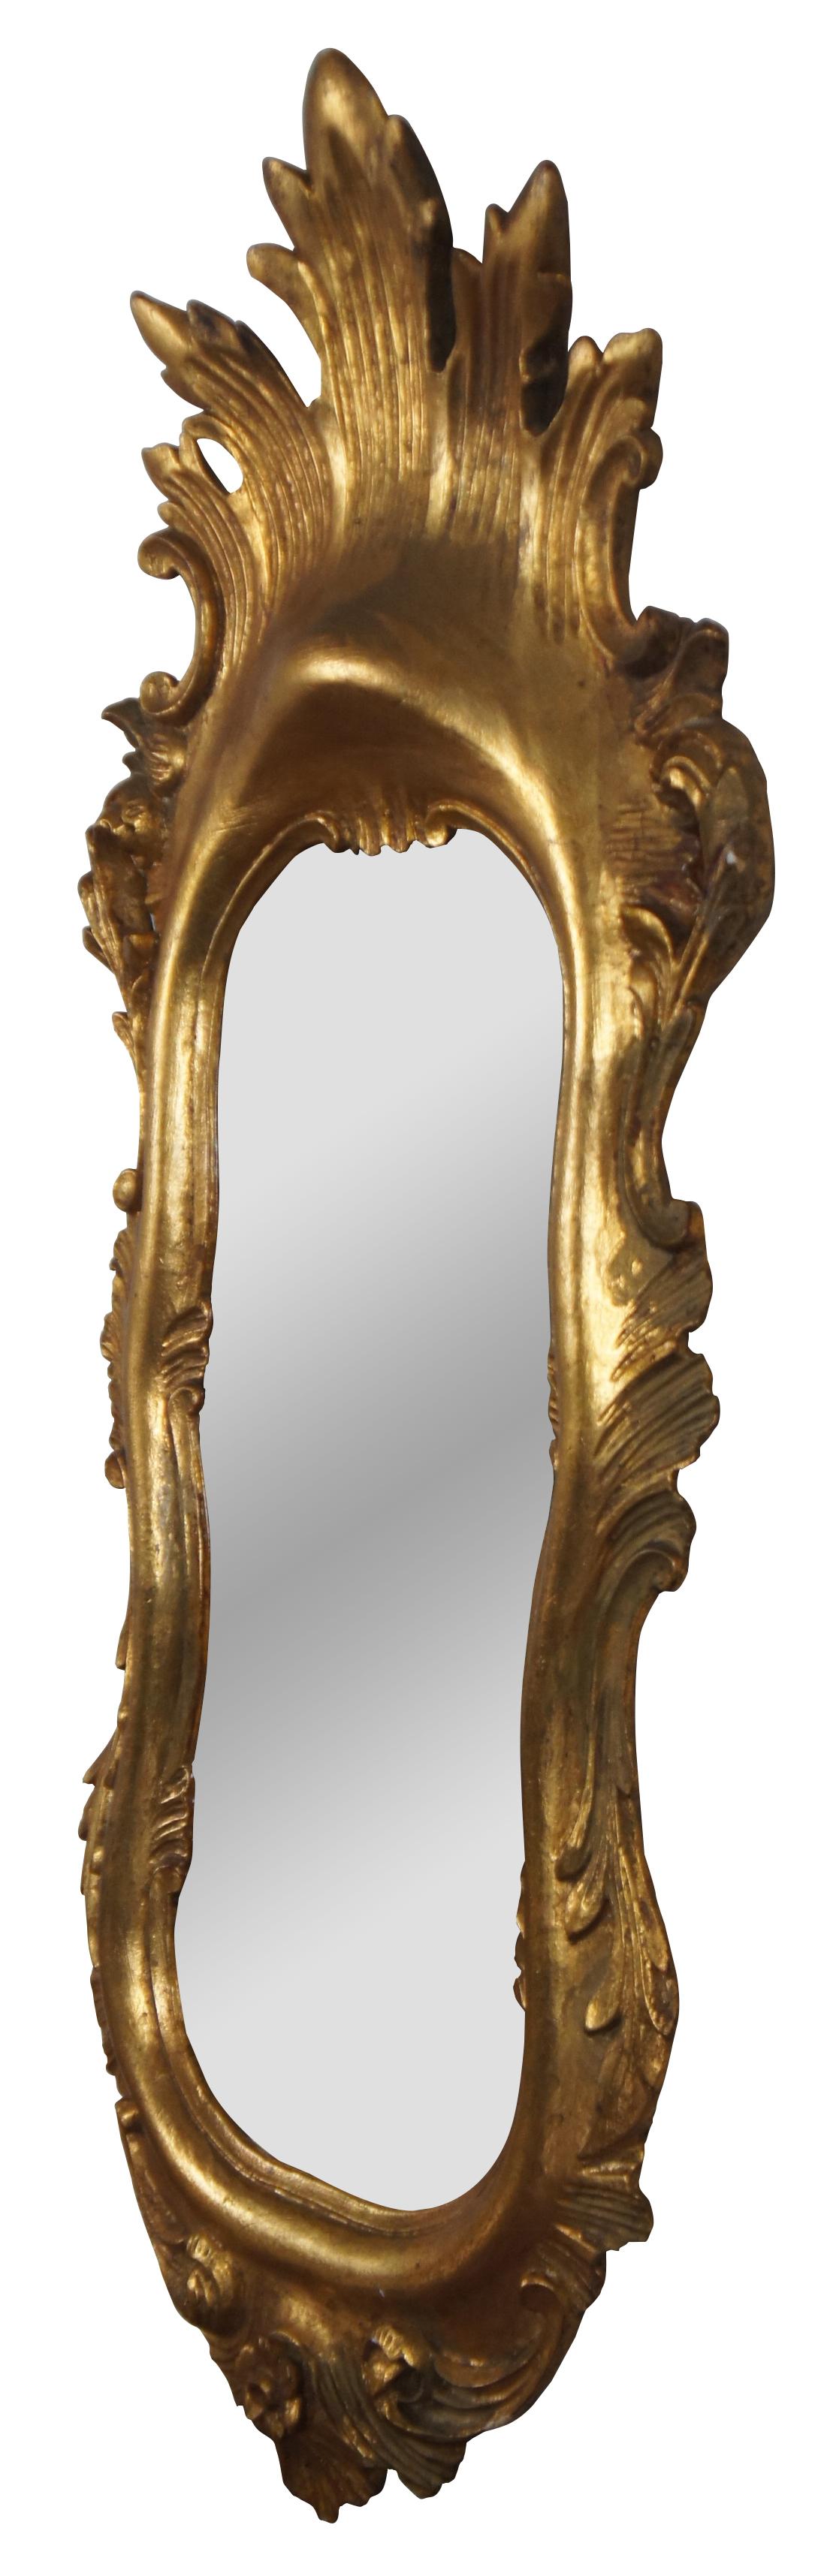 Vintage Italian rococo / baroque / Florentine oval gilt wall vanity mirror by Palmira Art Company, with a motif of scrolling leaves and a splash shape at the crest.

Measures: 12.5” x 2” x 30” / mirror - 6.5” x 16.25” (width x depth x height).
 